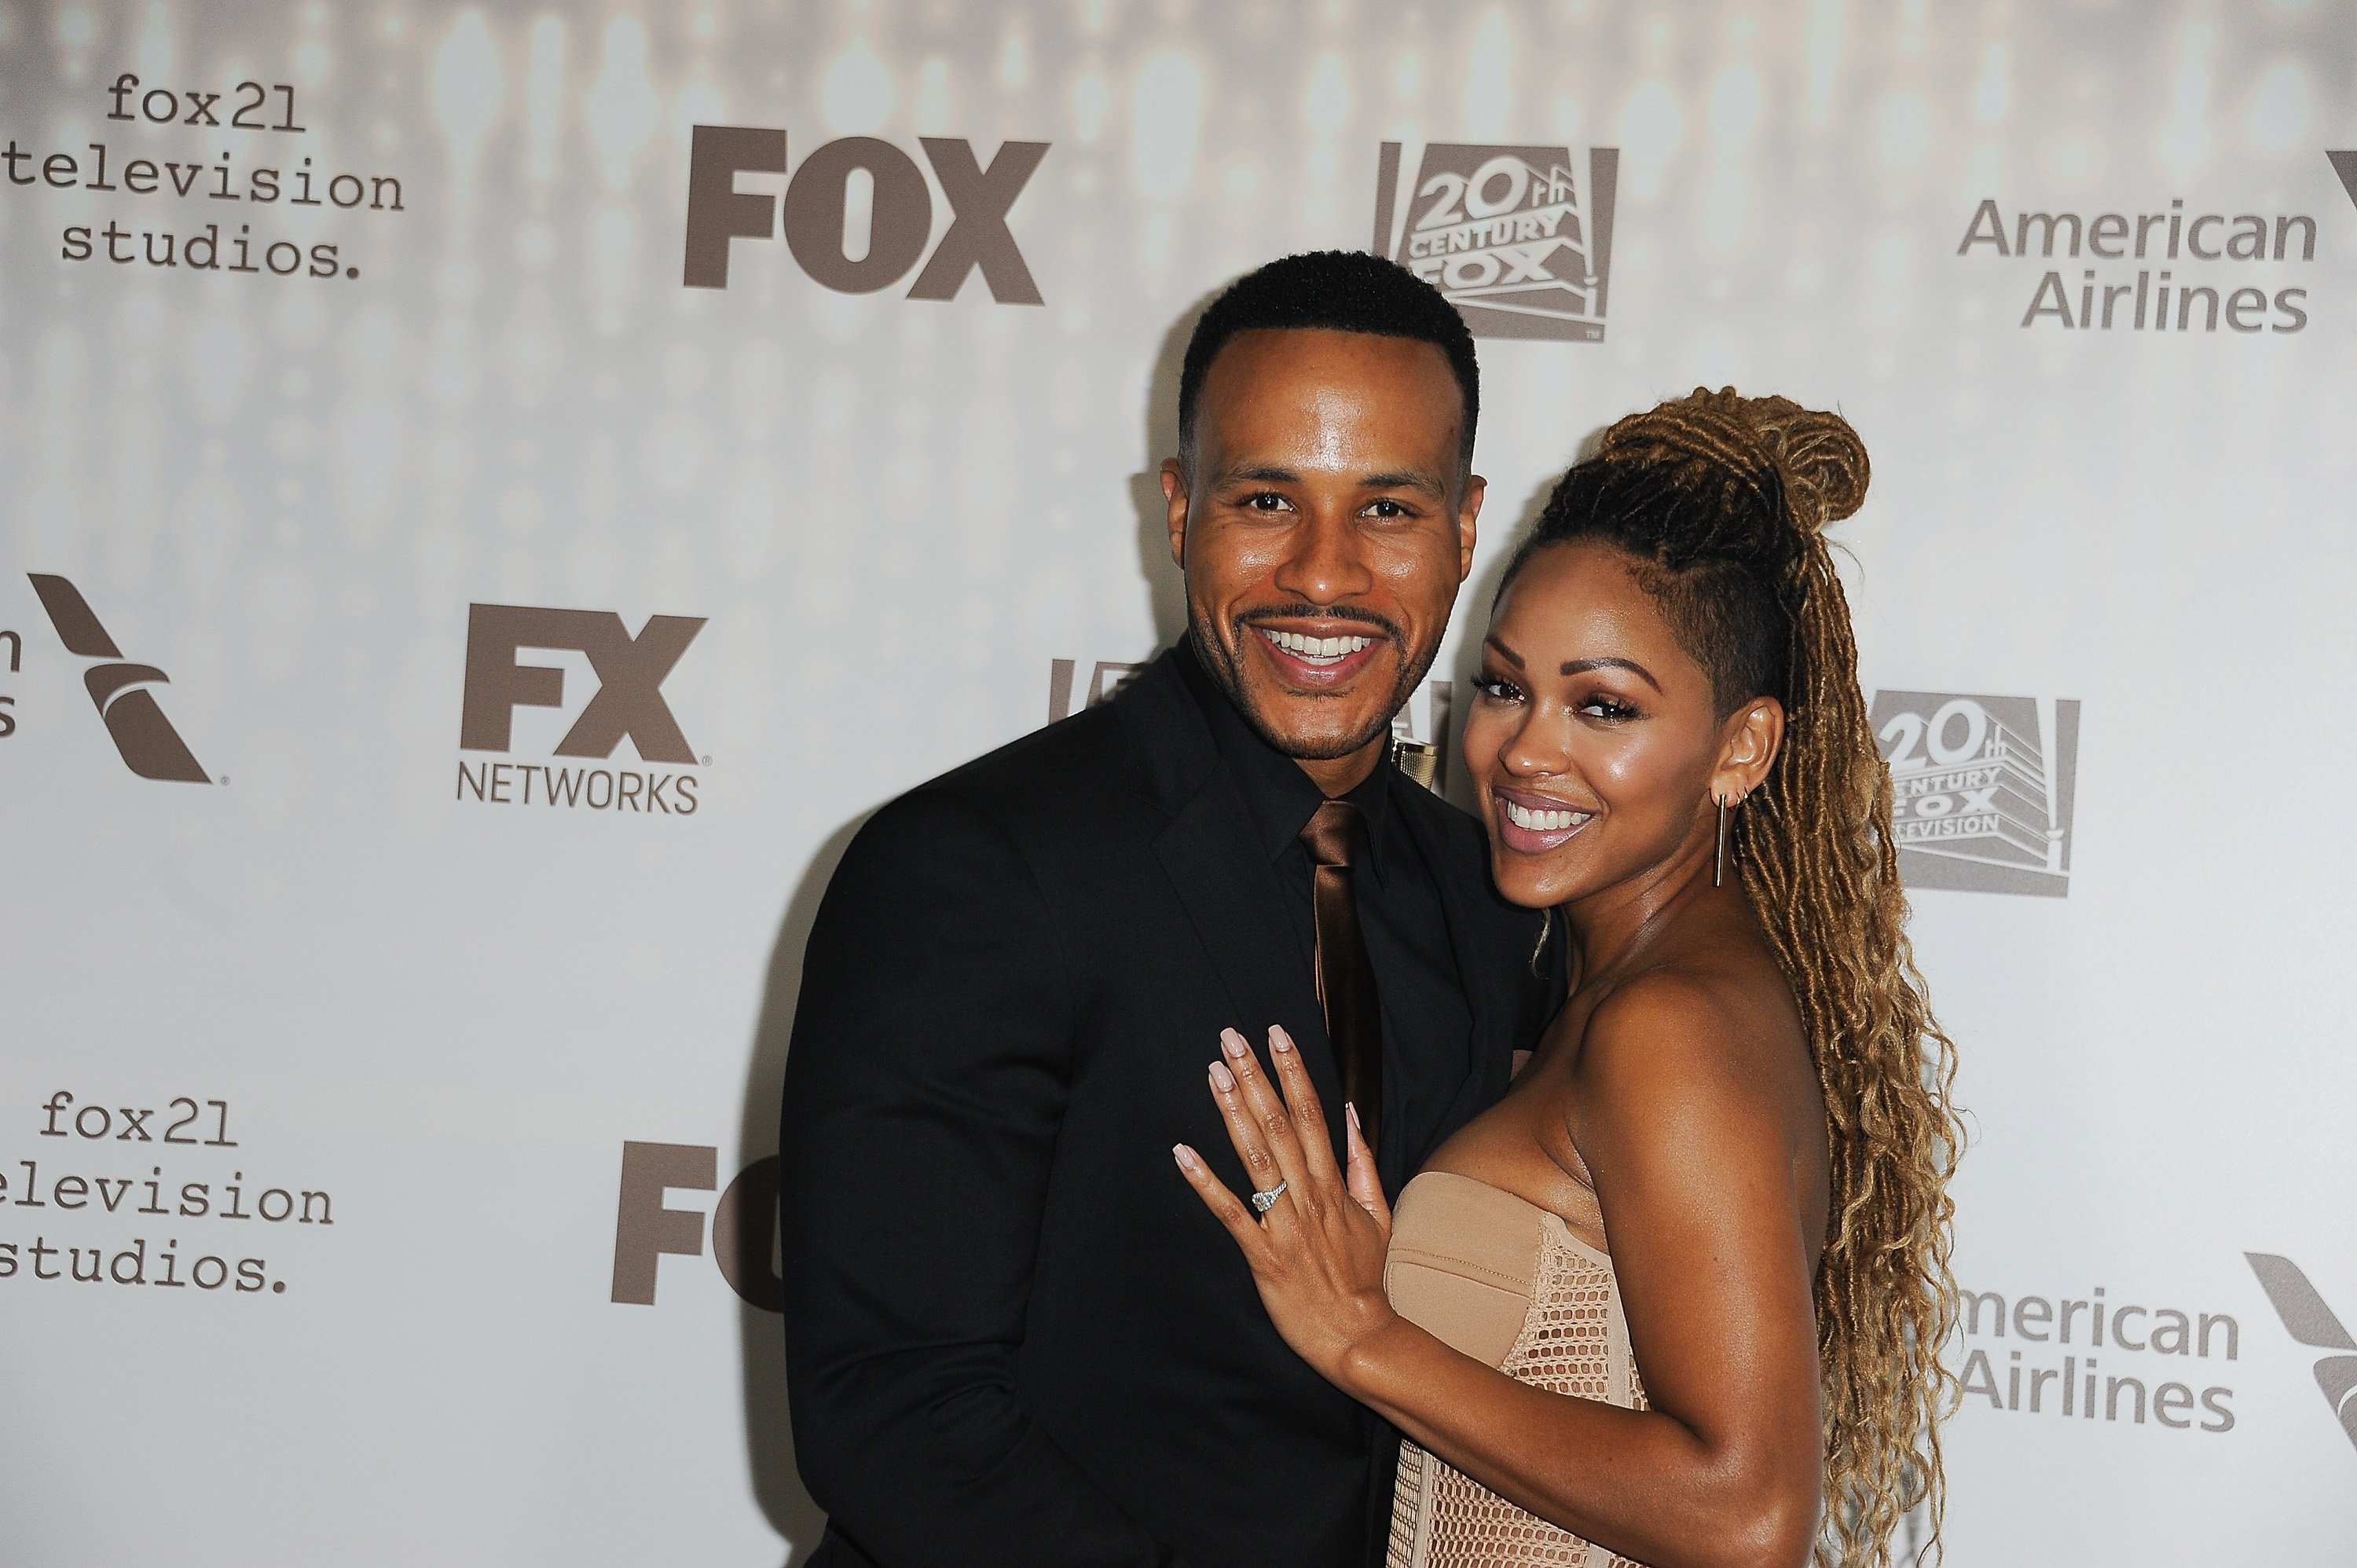 DeVon Franklin and Meagan Good at the 2017 Golden Globe Awards after-party.| Source: Getty Images